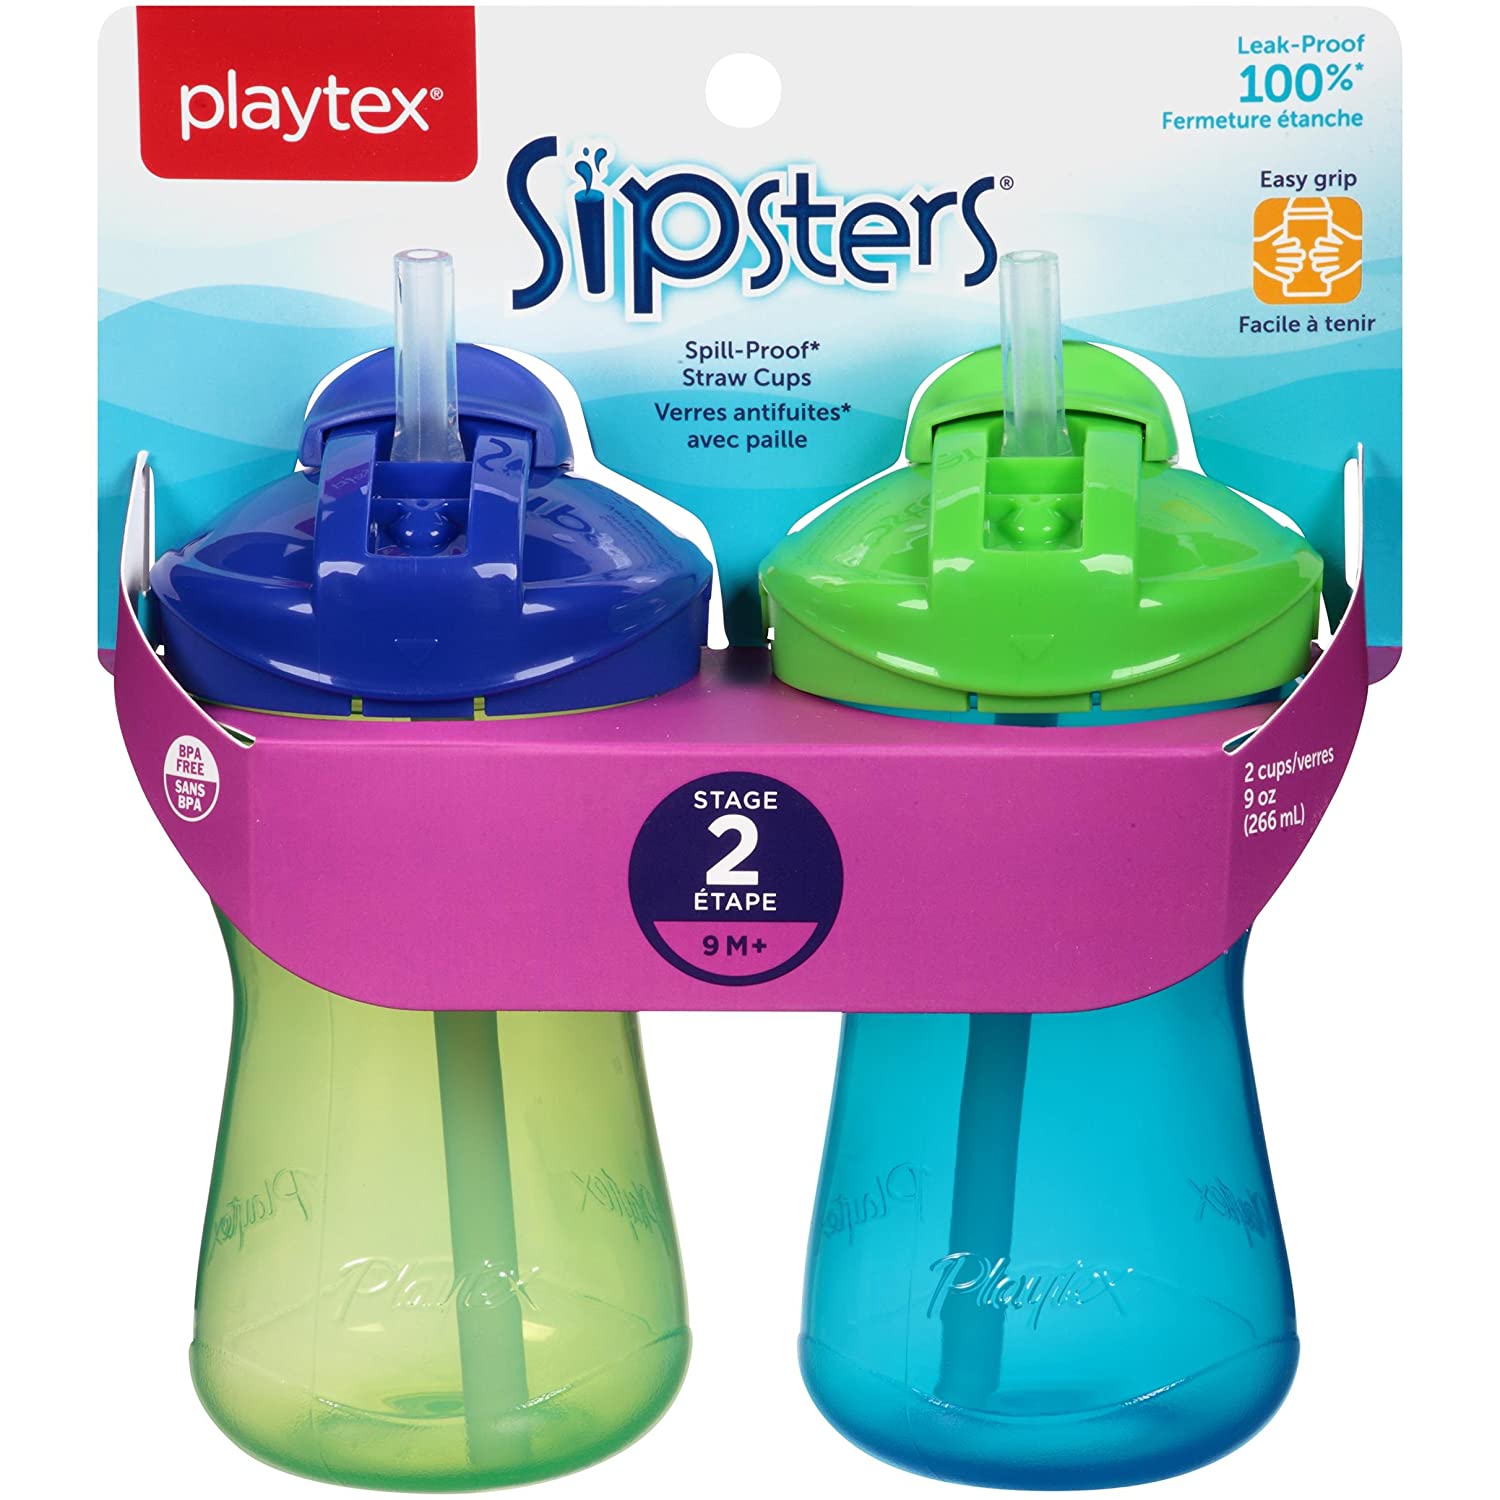 Playtex® Stage 2 Straw Cup  - 2 Pack - Blue and Green